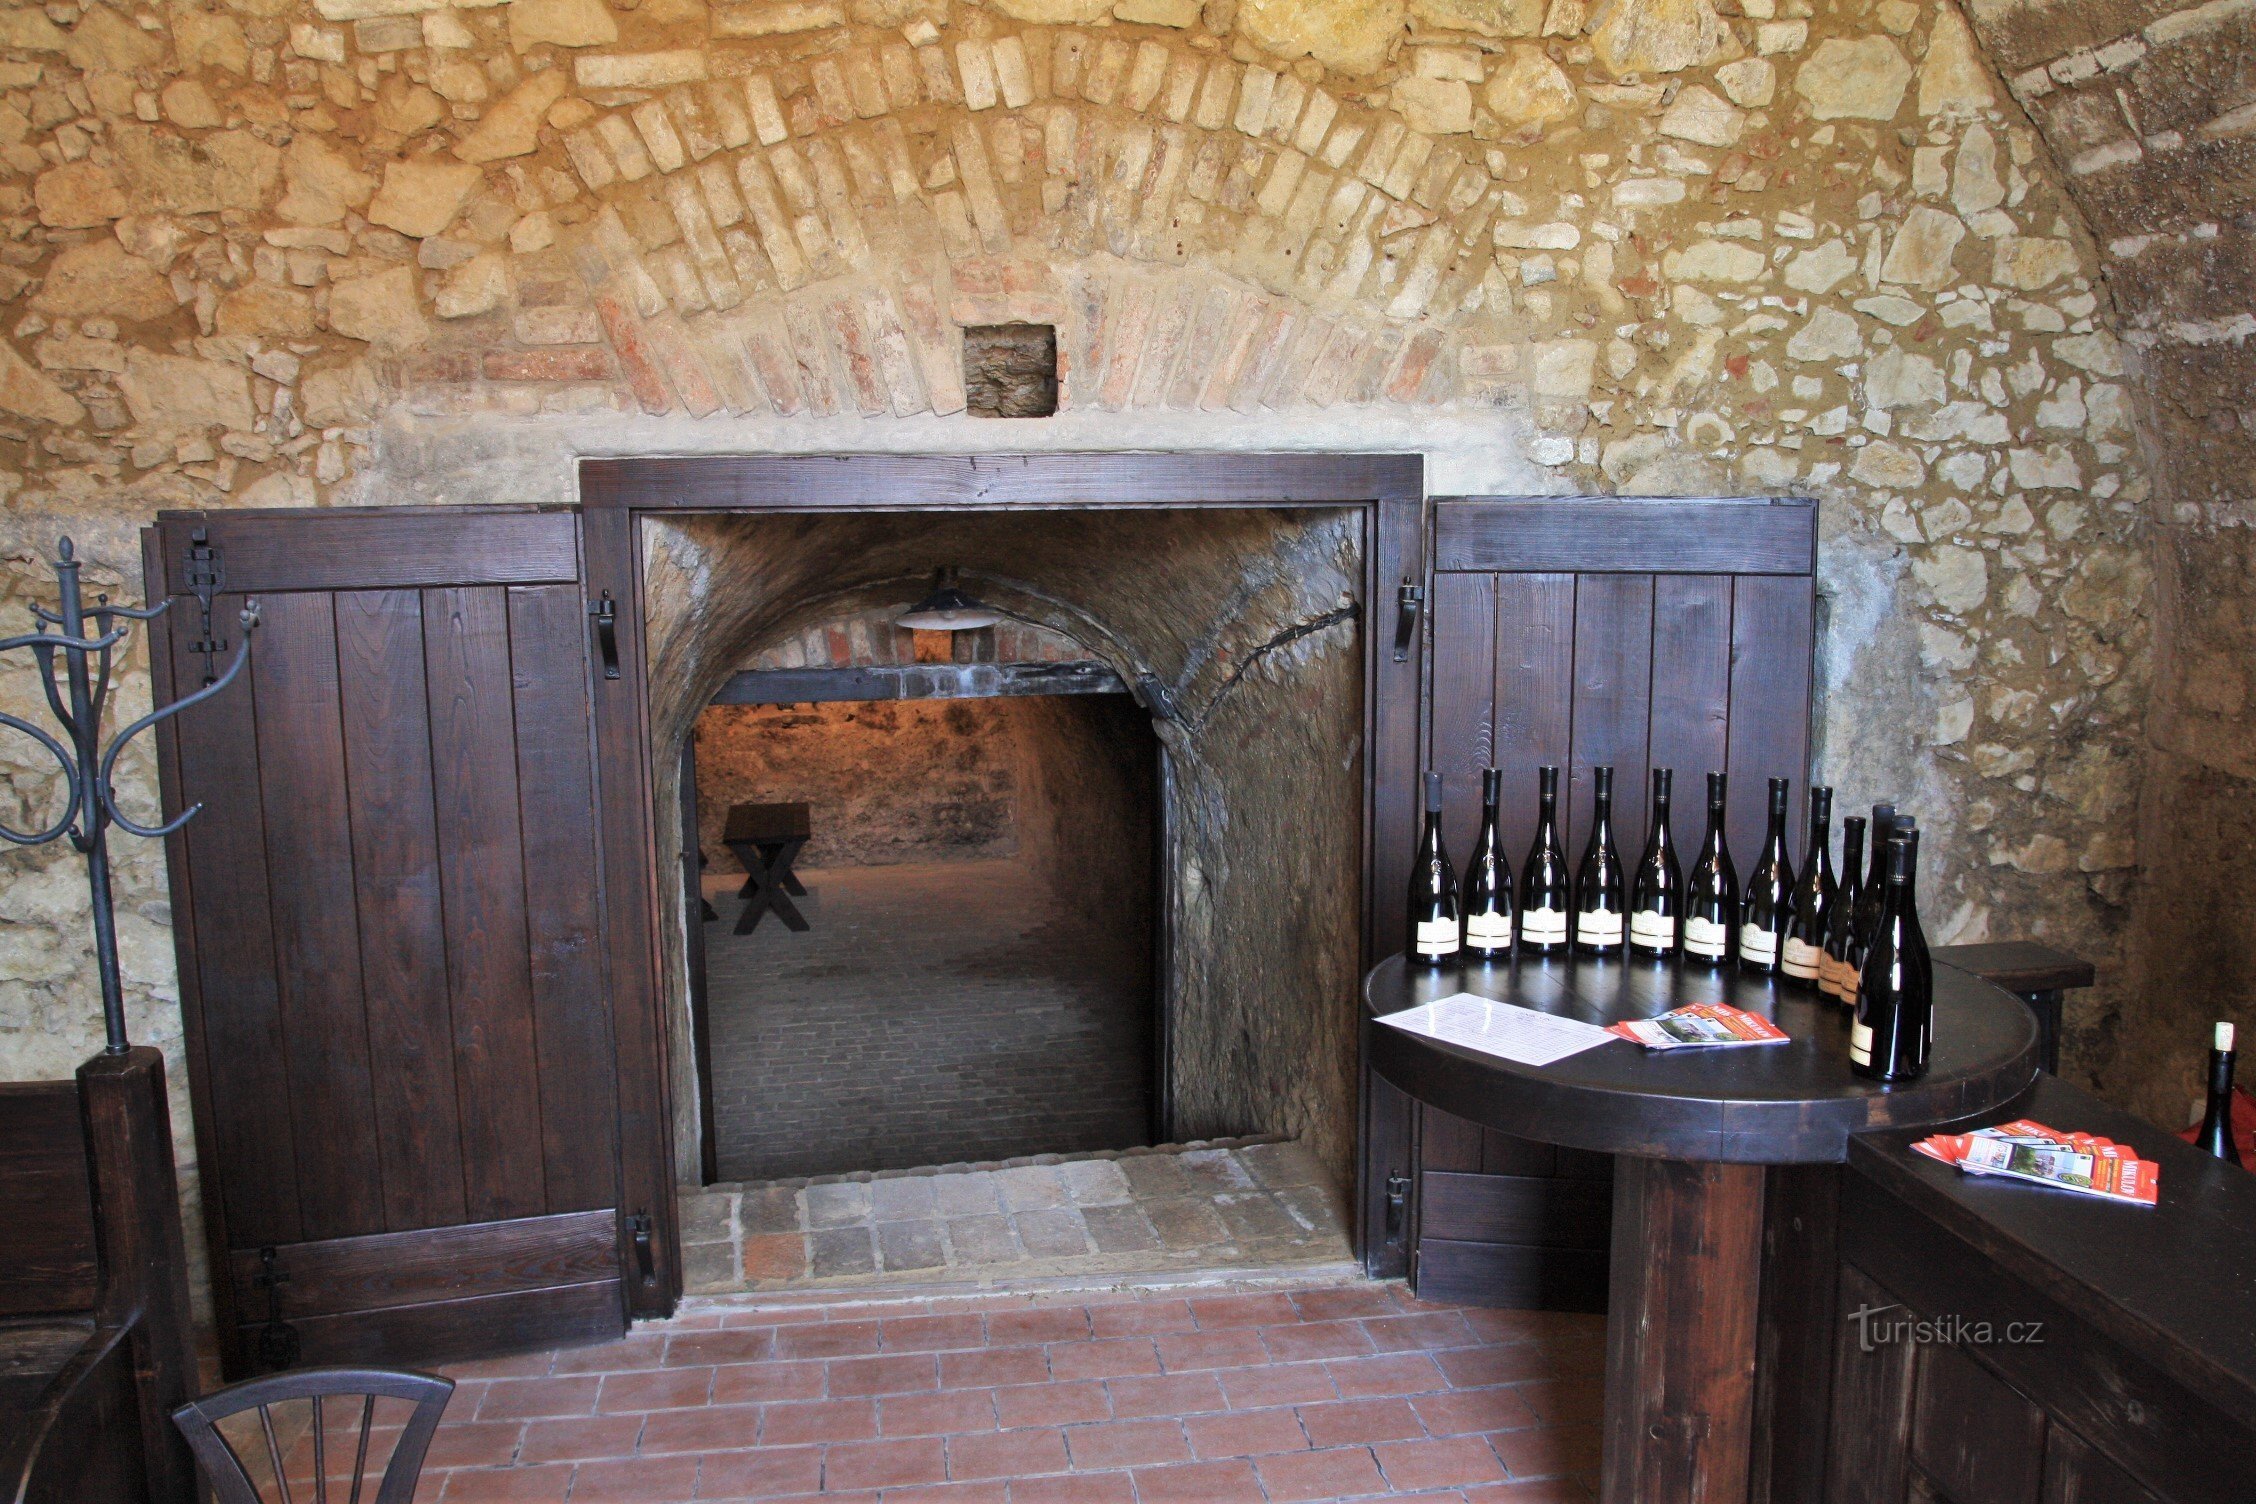 Wine cellar in the basement of the building